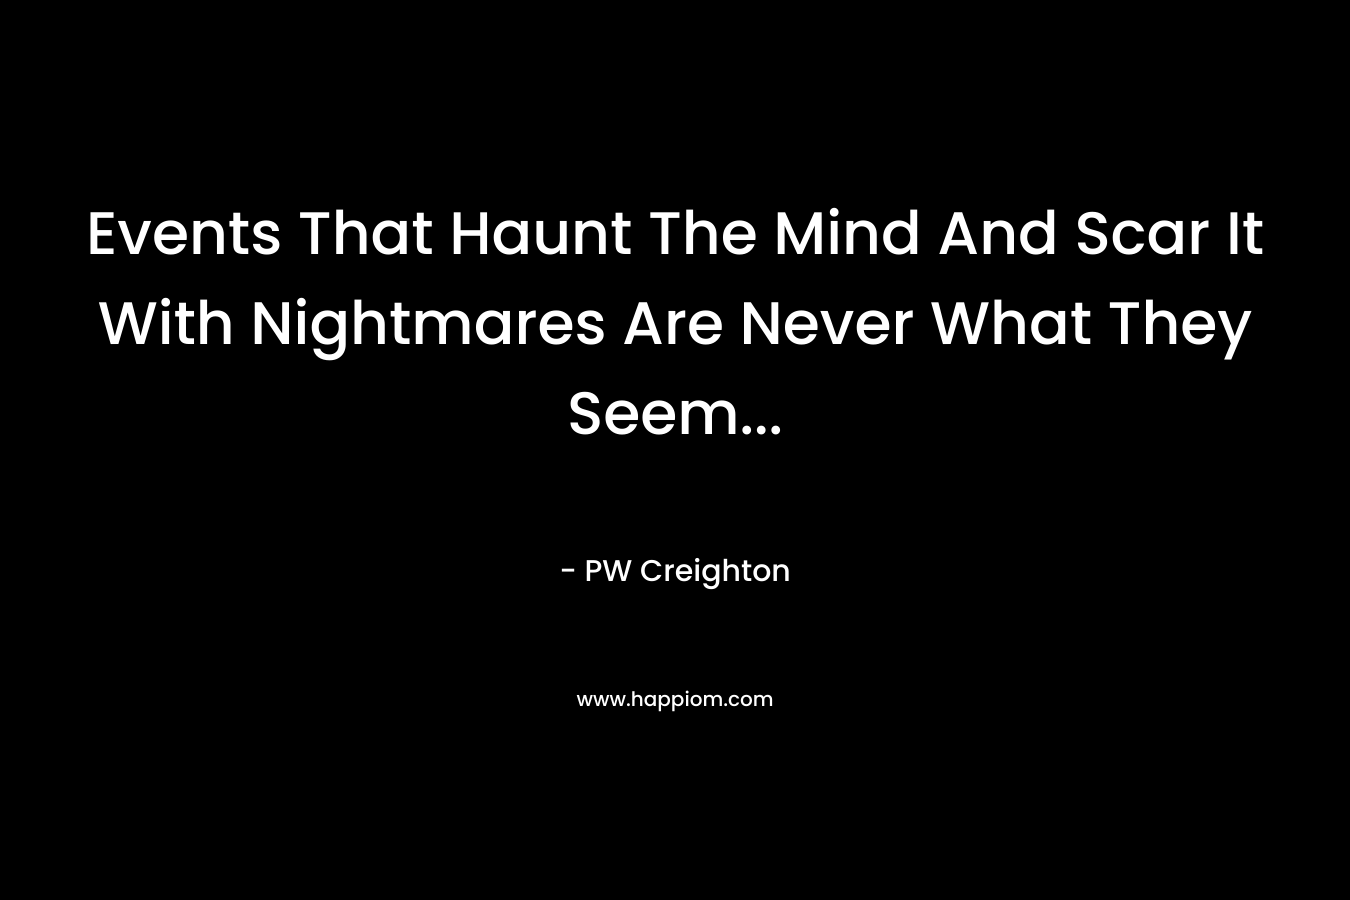 Events That Haunt The Mind And Scar It With Nightmares Are Never What They Seem...